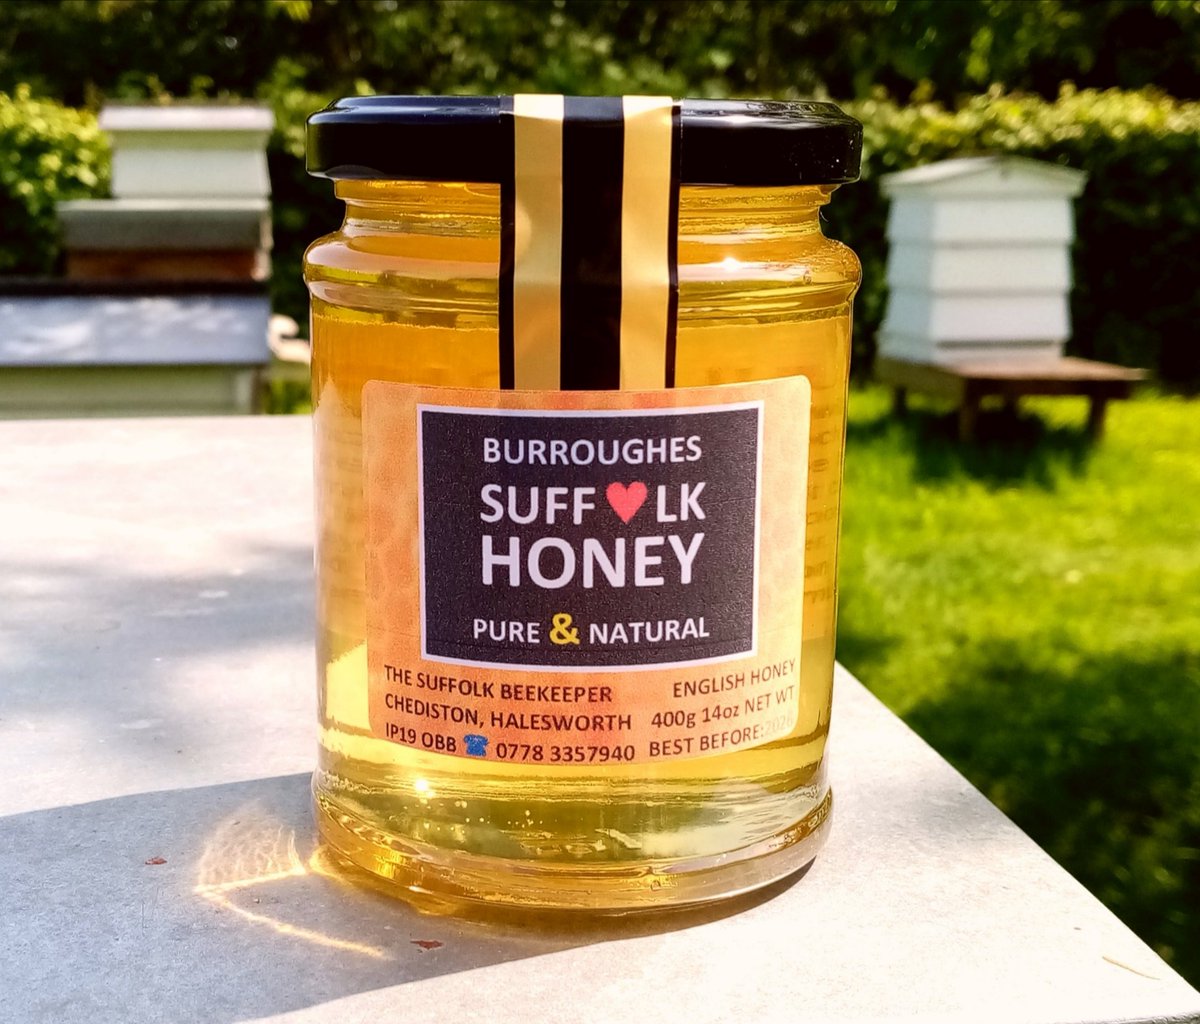 Single apiary spring honey can be truly unique. A mixture of hawthorn, cherry, apple and more. What's your favourite? 🐝🍯 @britishbee @BeekeepersHour @FarmingUK #bees #honey #nature #Suffolk #wildflowers